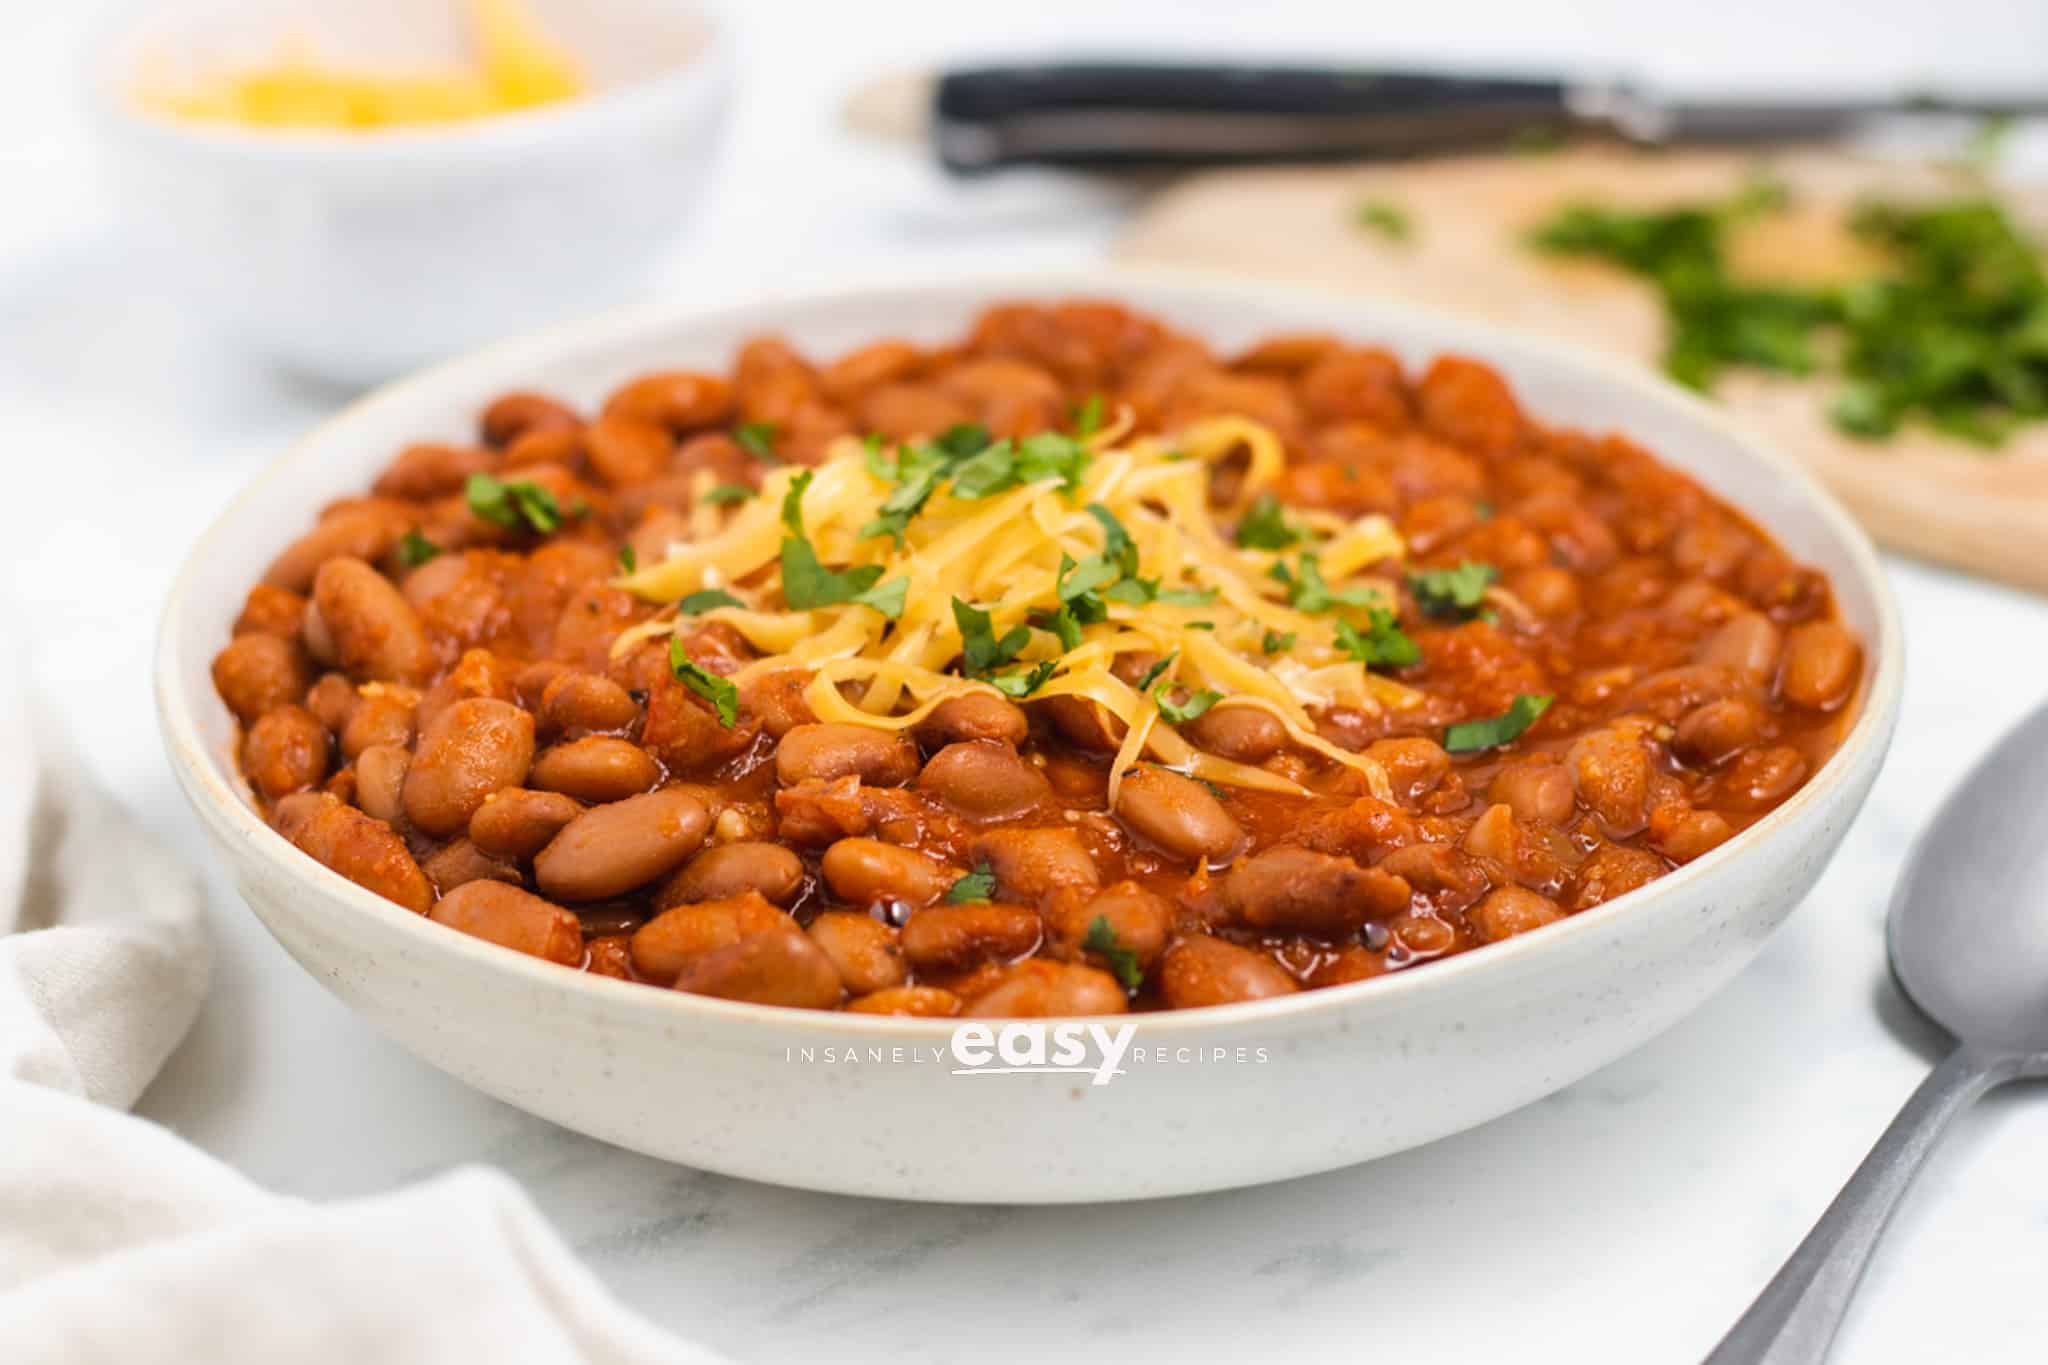 a bowl filled to the top with seasoned ranch style beans. They are topped with shredded cheese and herbs.